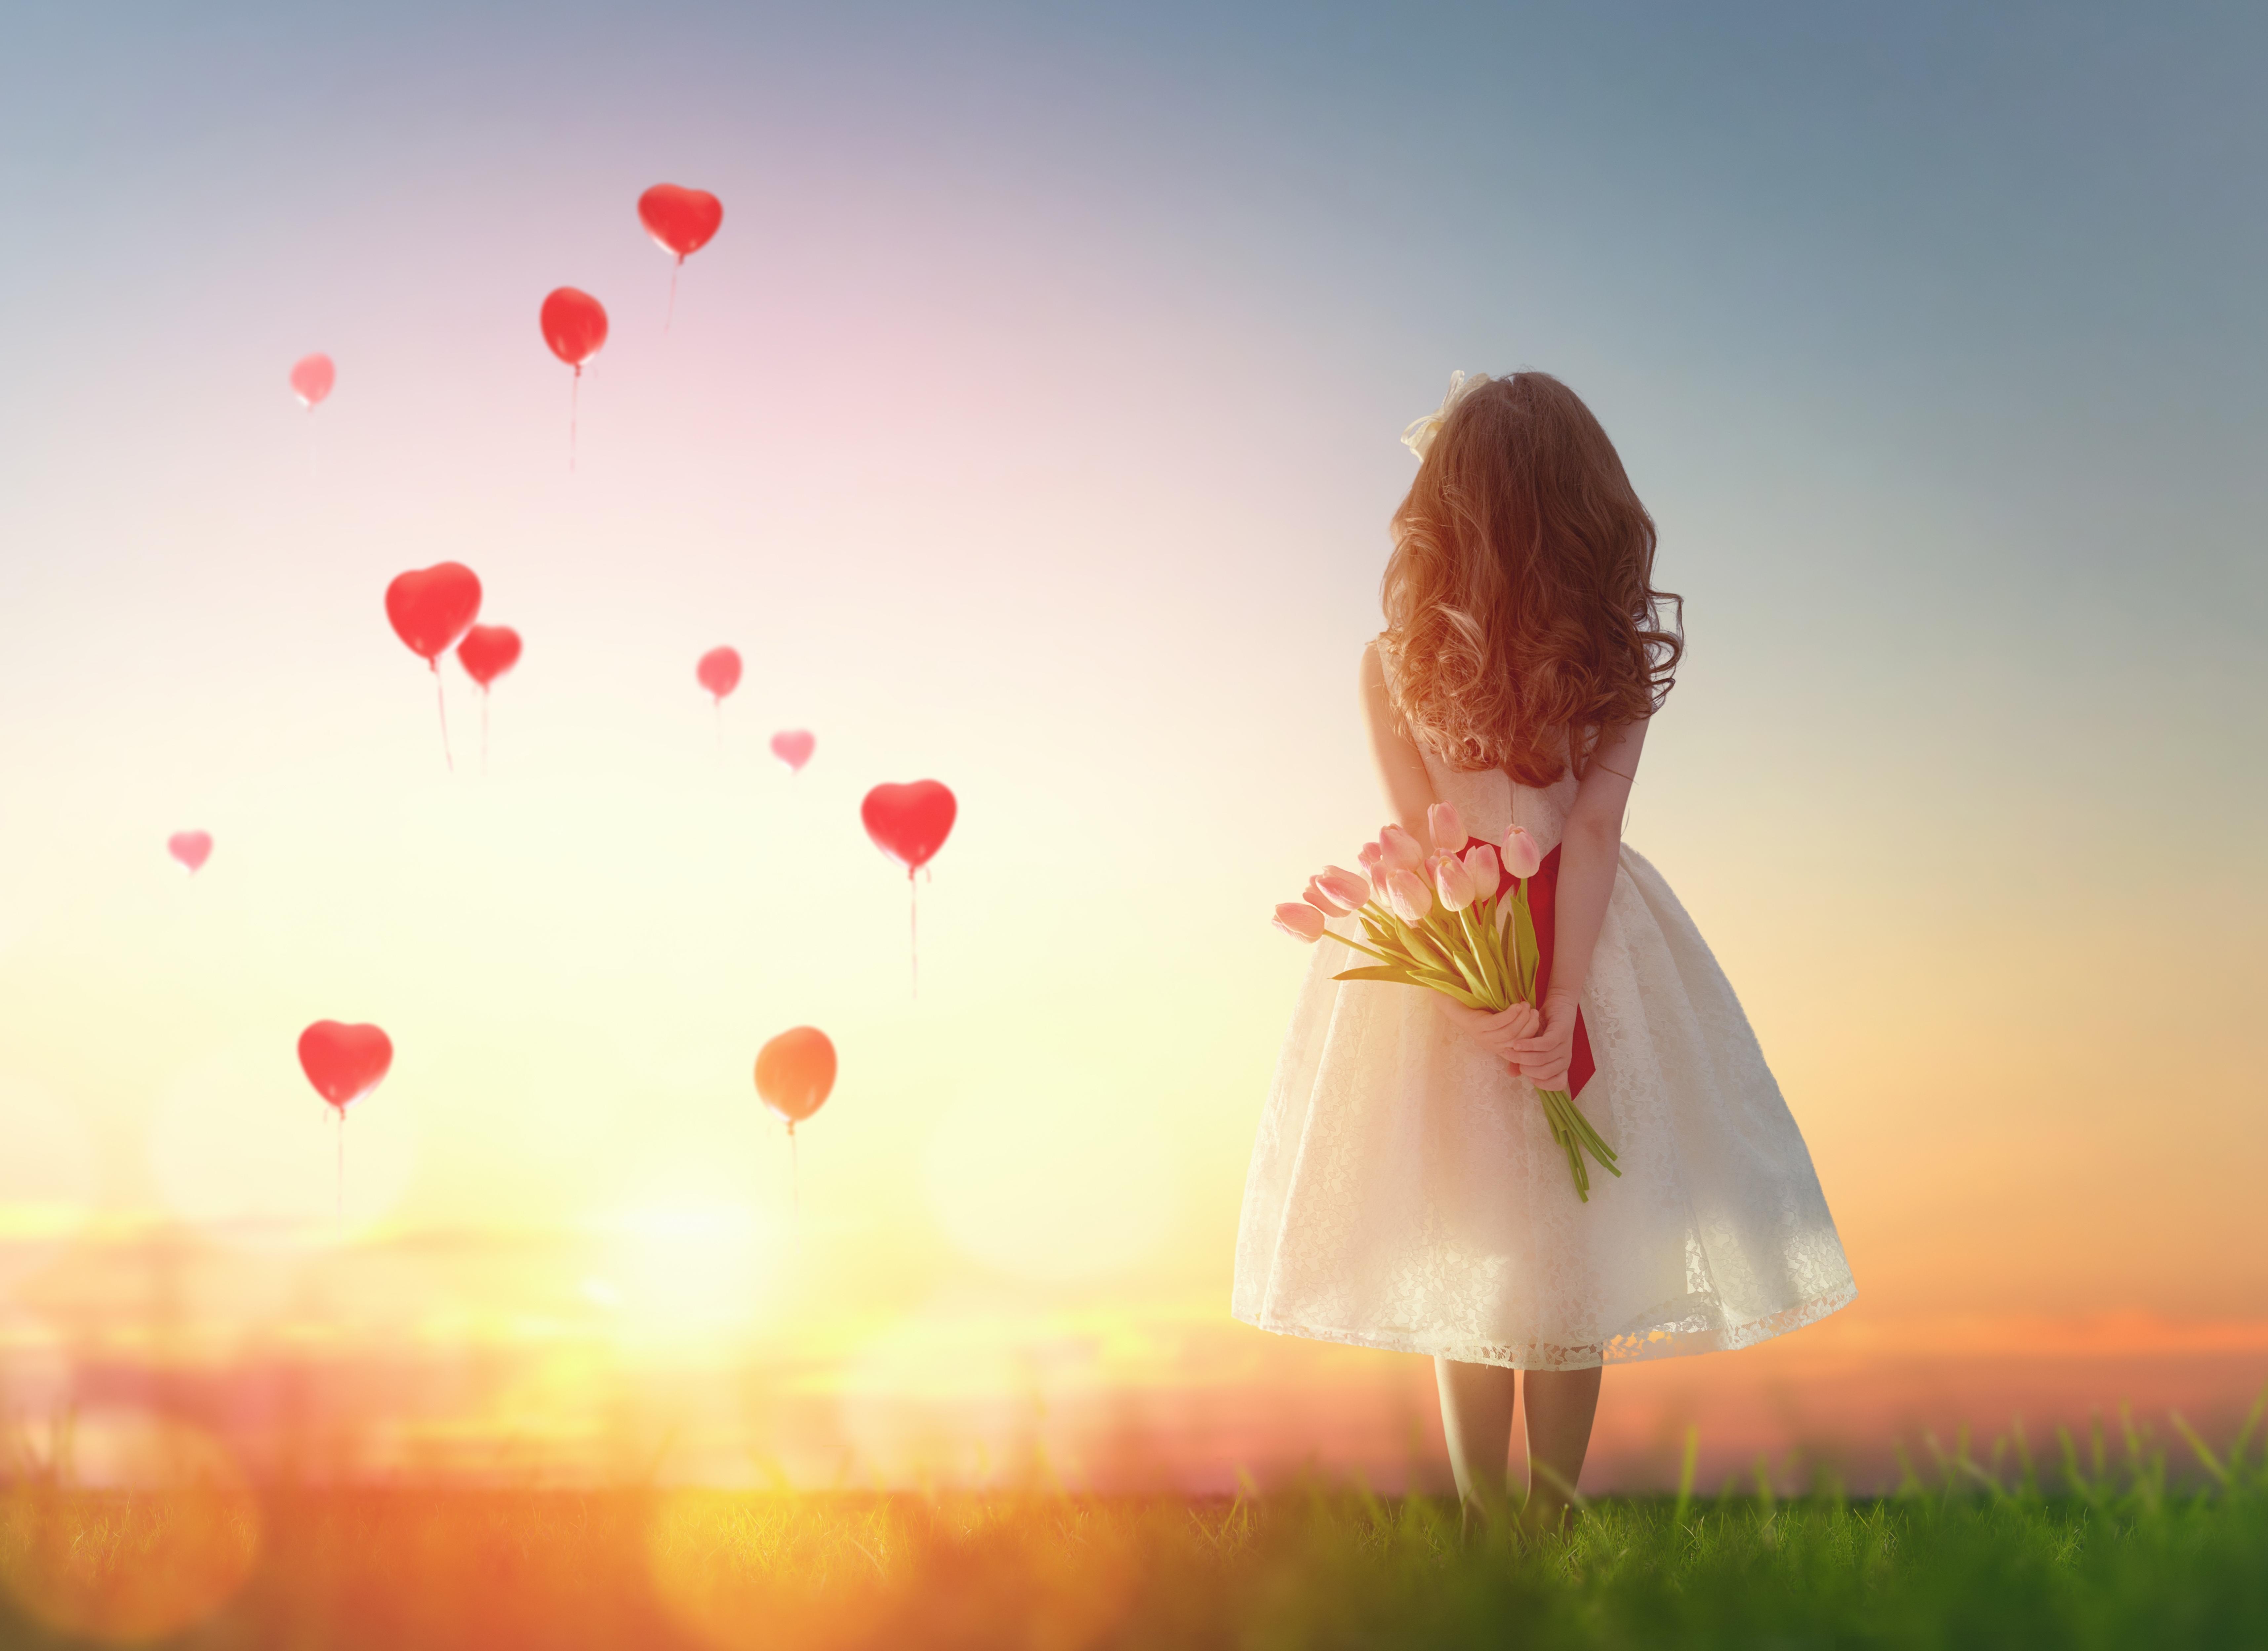 Heart Shape balloons wallpaper and background